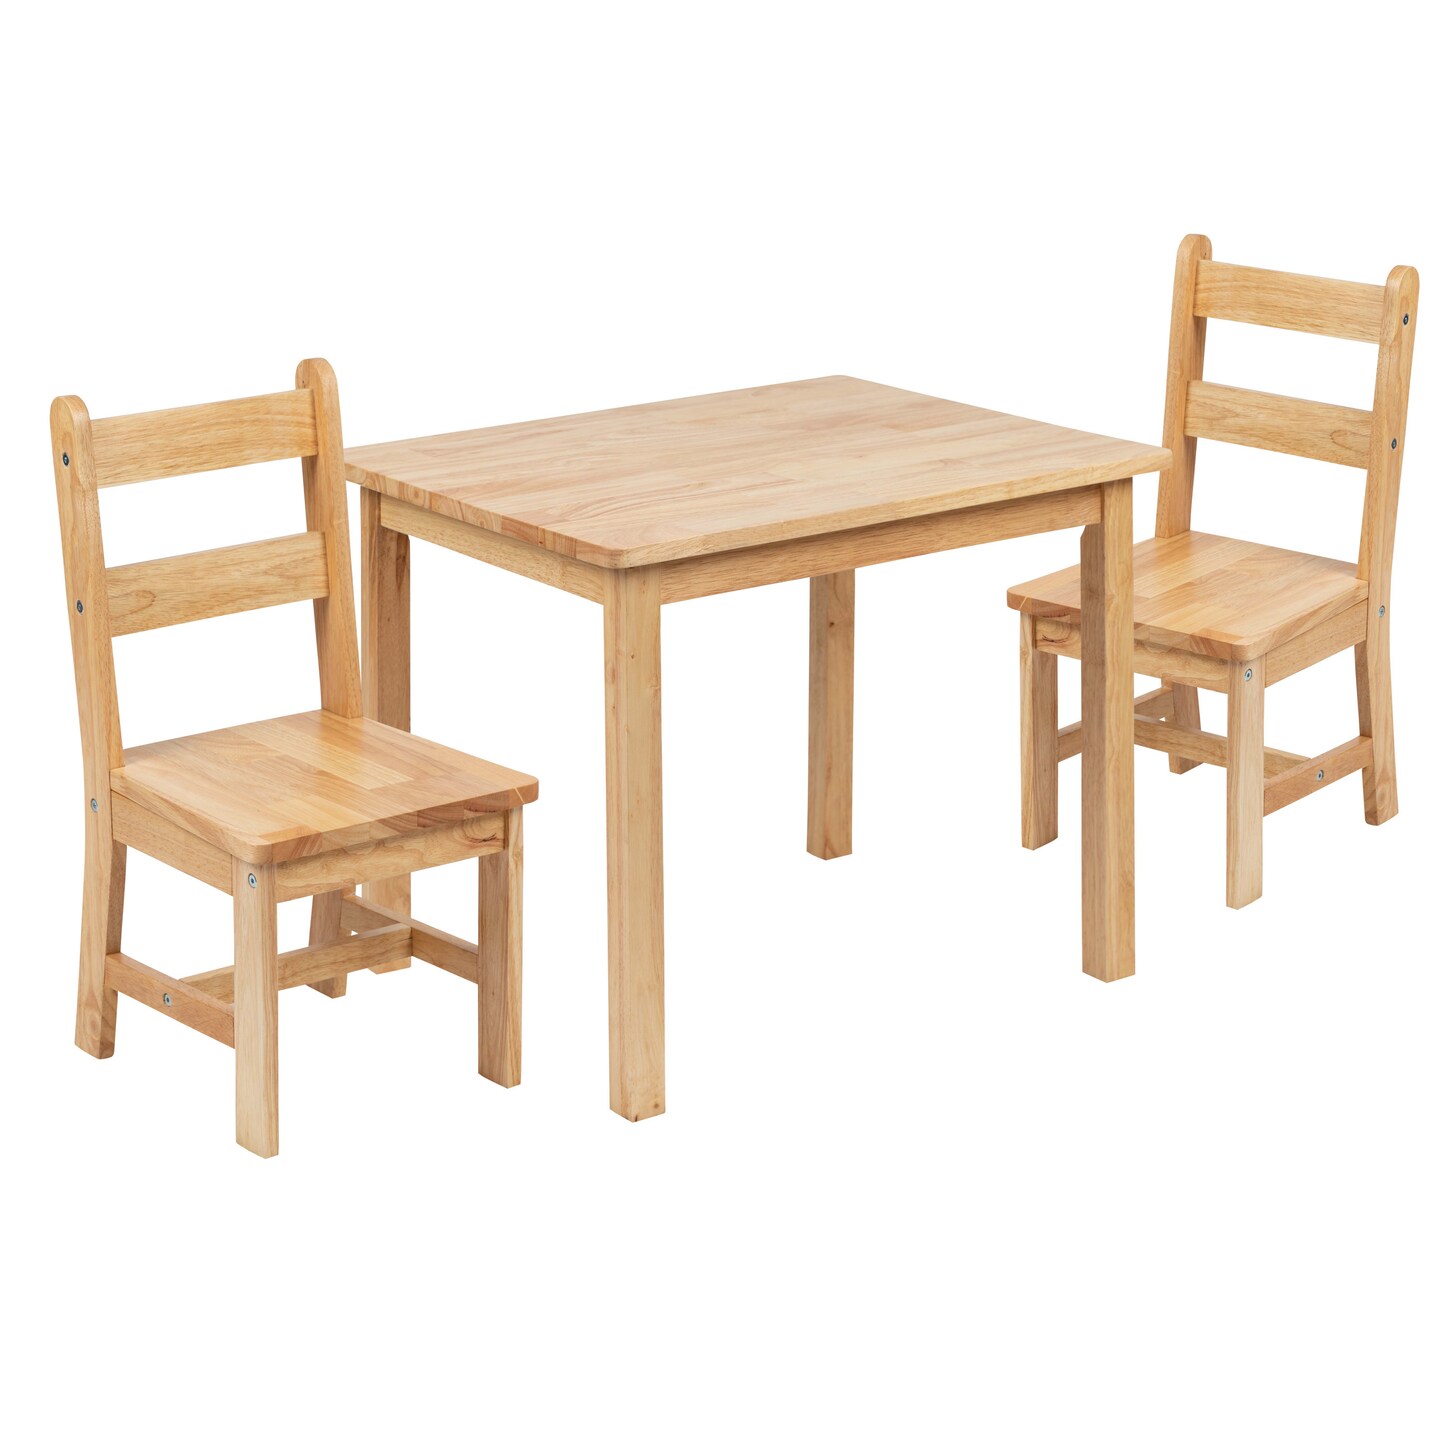 Emma and Oliver Kids 3 Piece Solid Hardwood Table and Chair Set for Playroom, Kitchen